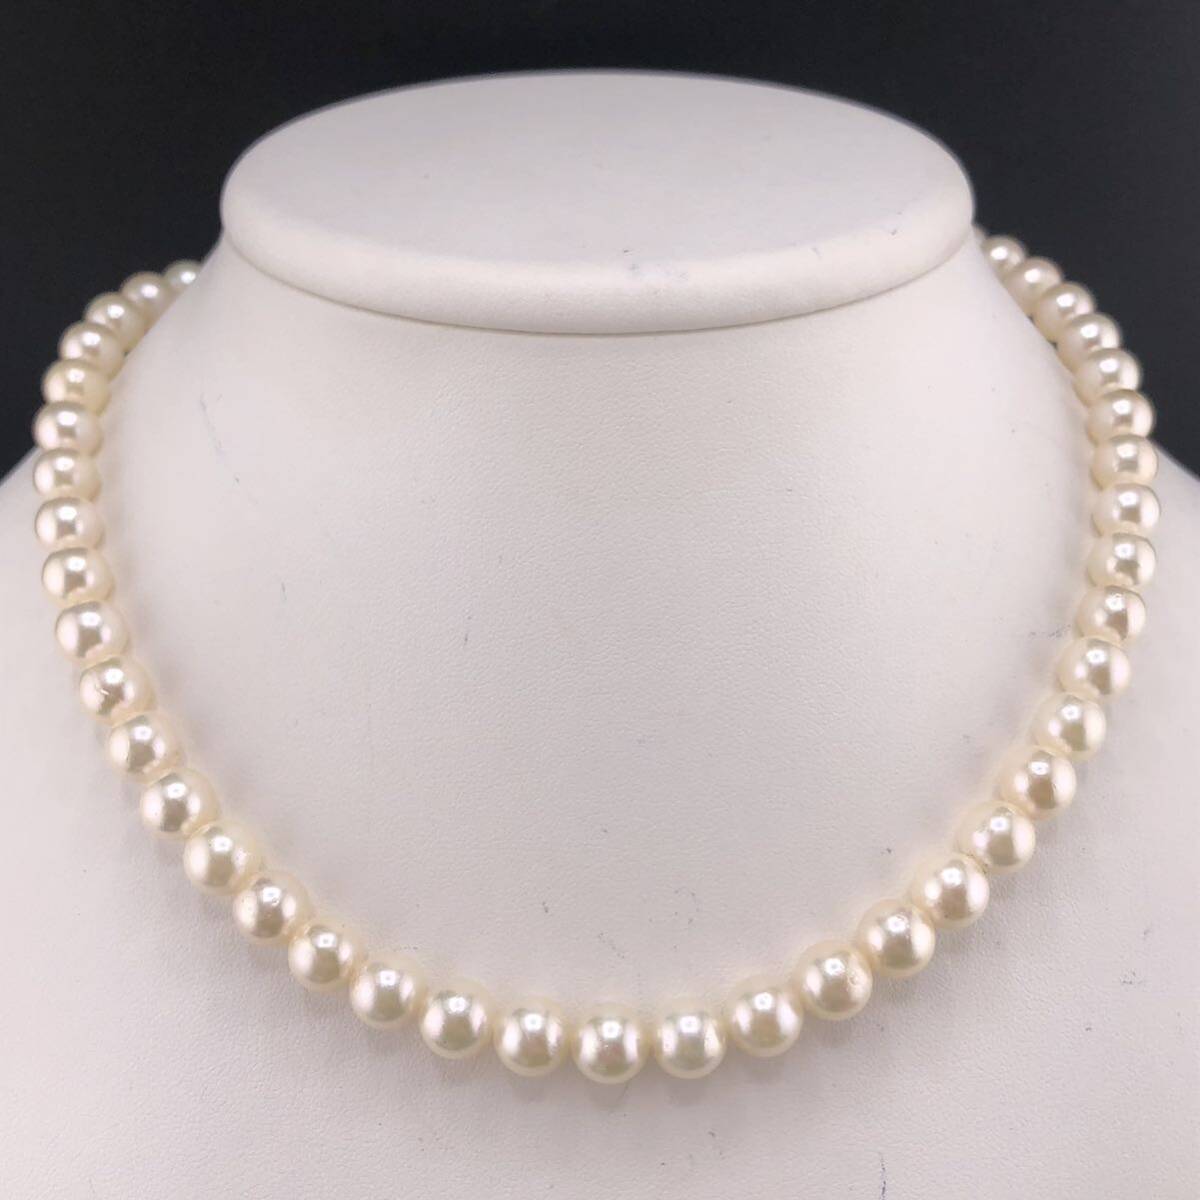 E03-6135 アコヤパールネックレス 7.0mm~7.5mm 40cm 37.6g ( アコヤ真珠 Pearl necklace SILVER )の画像1